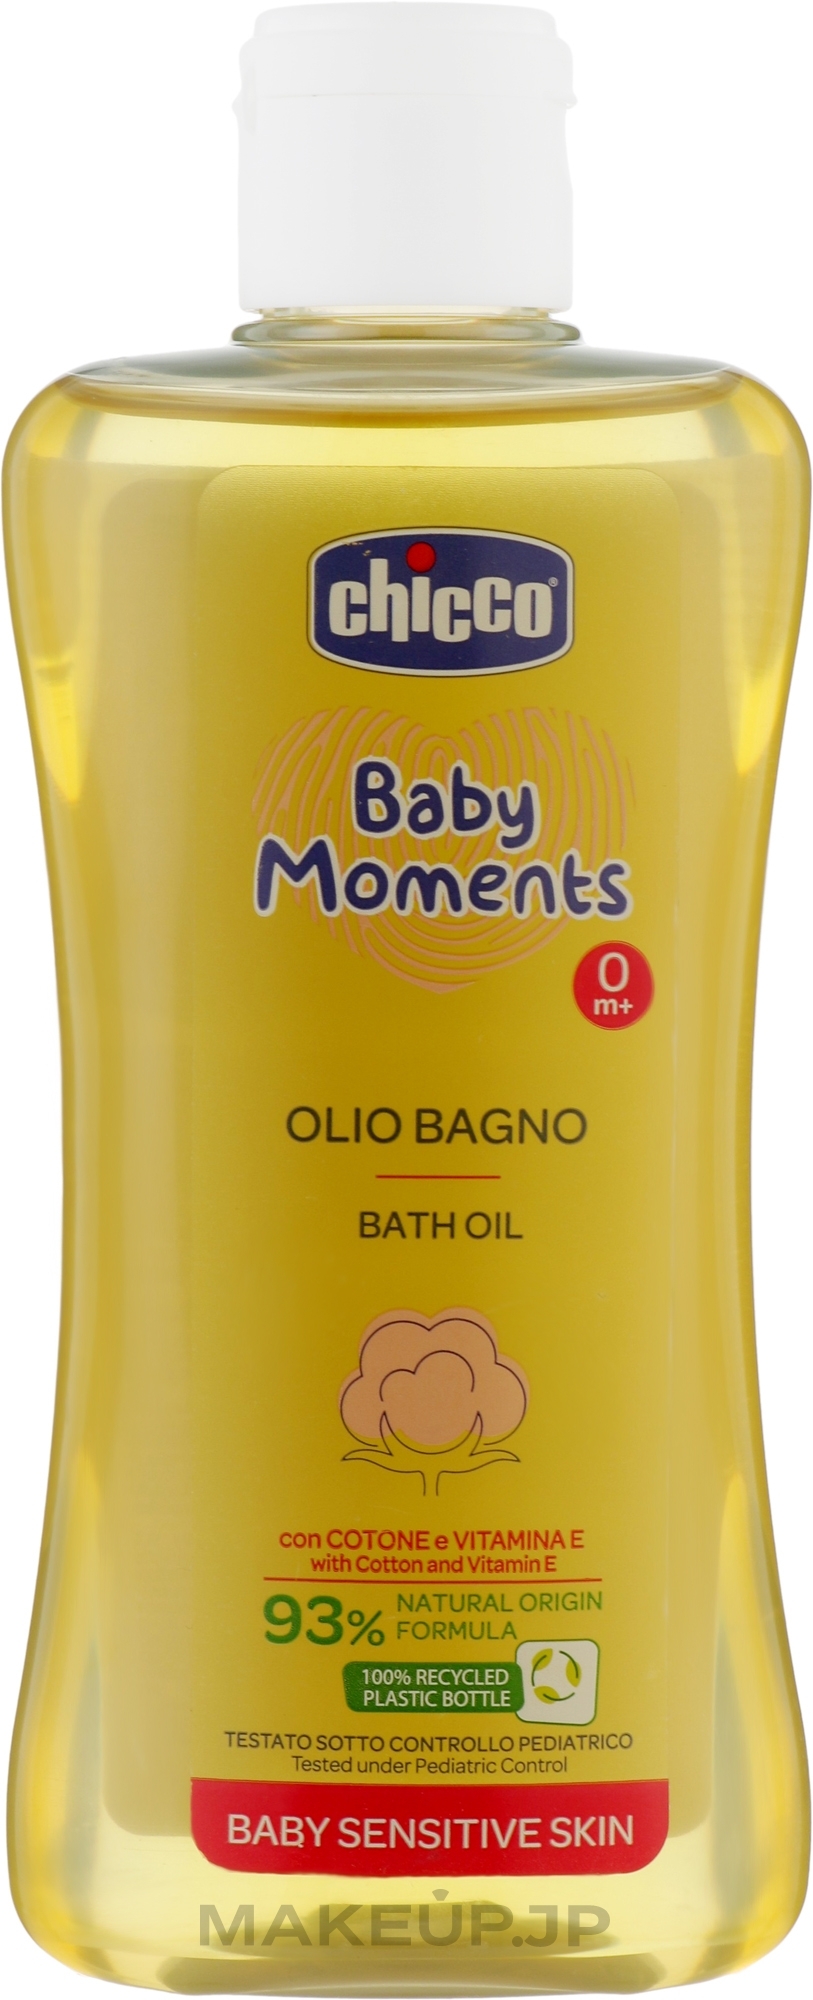 Bath Oil for Sensitive Skin - Chicco Baby Moments — photo 200 ml